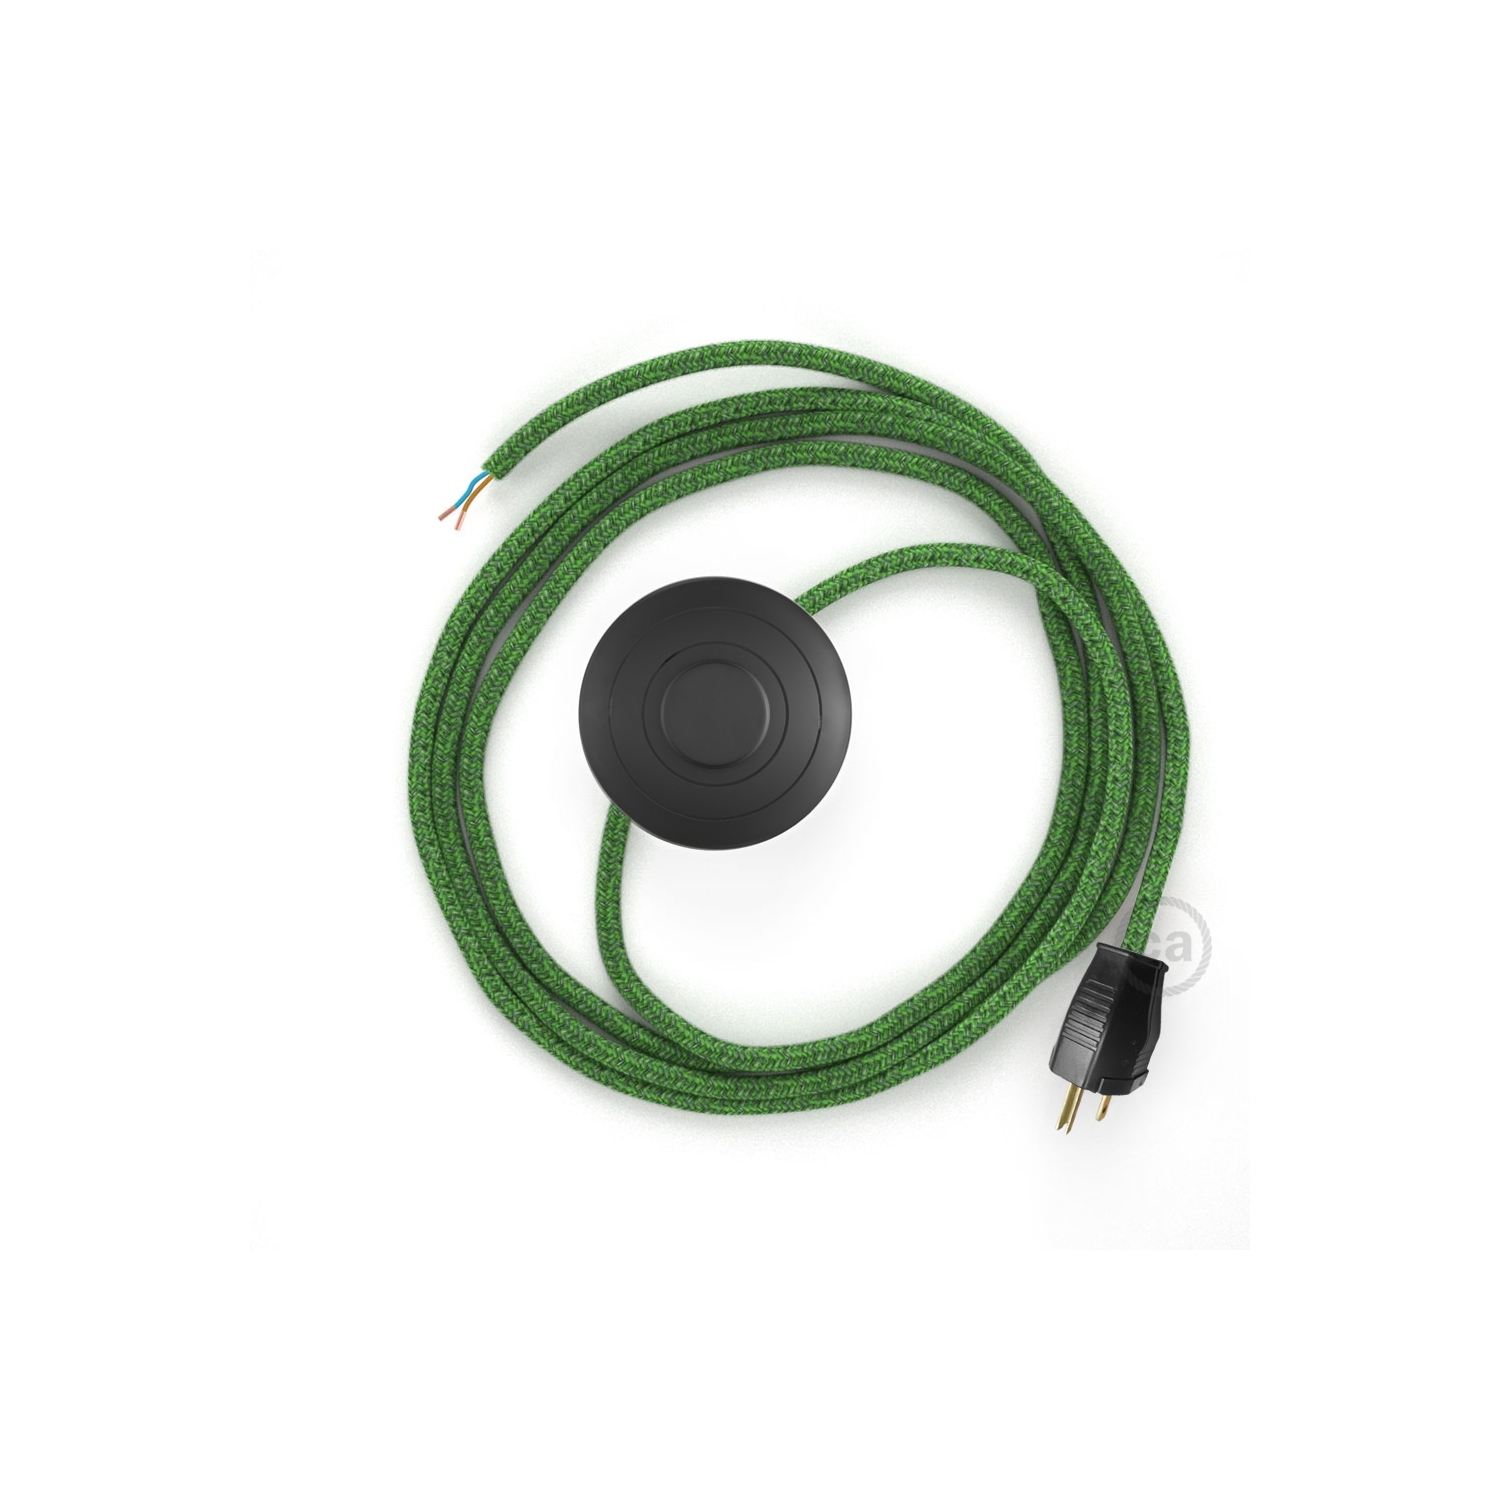 Power Cord with foot switch, RX08 Green Cotton Tweed - Choose color of switch/plug